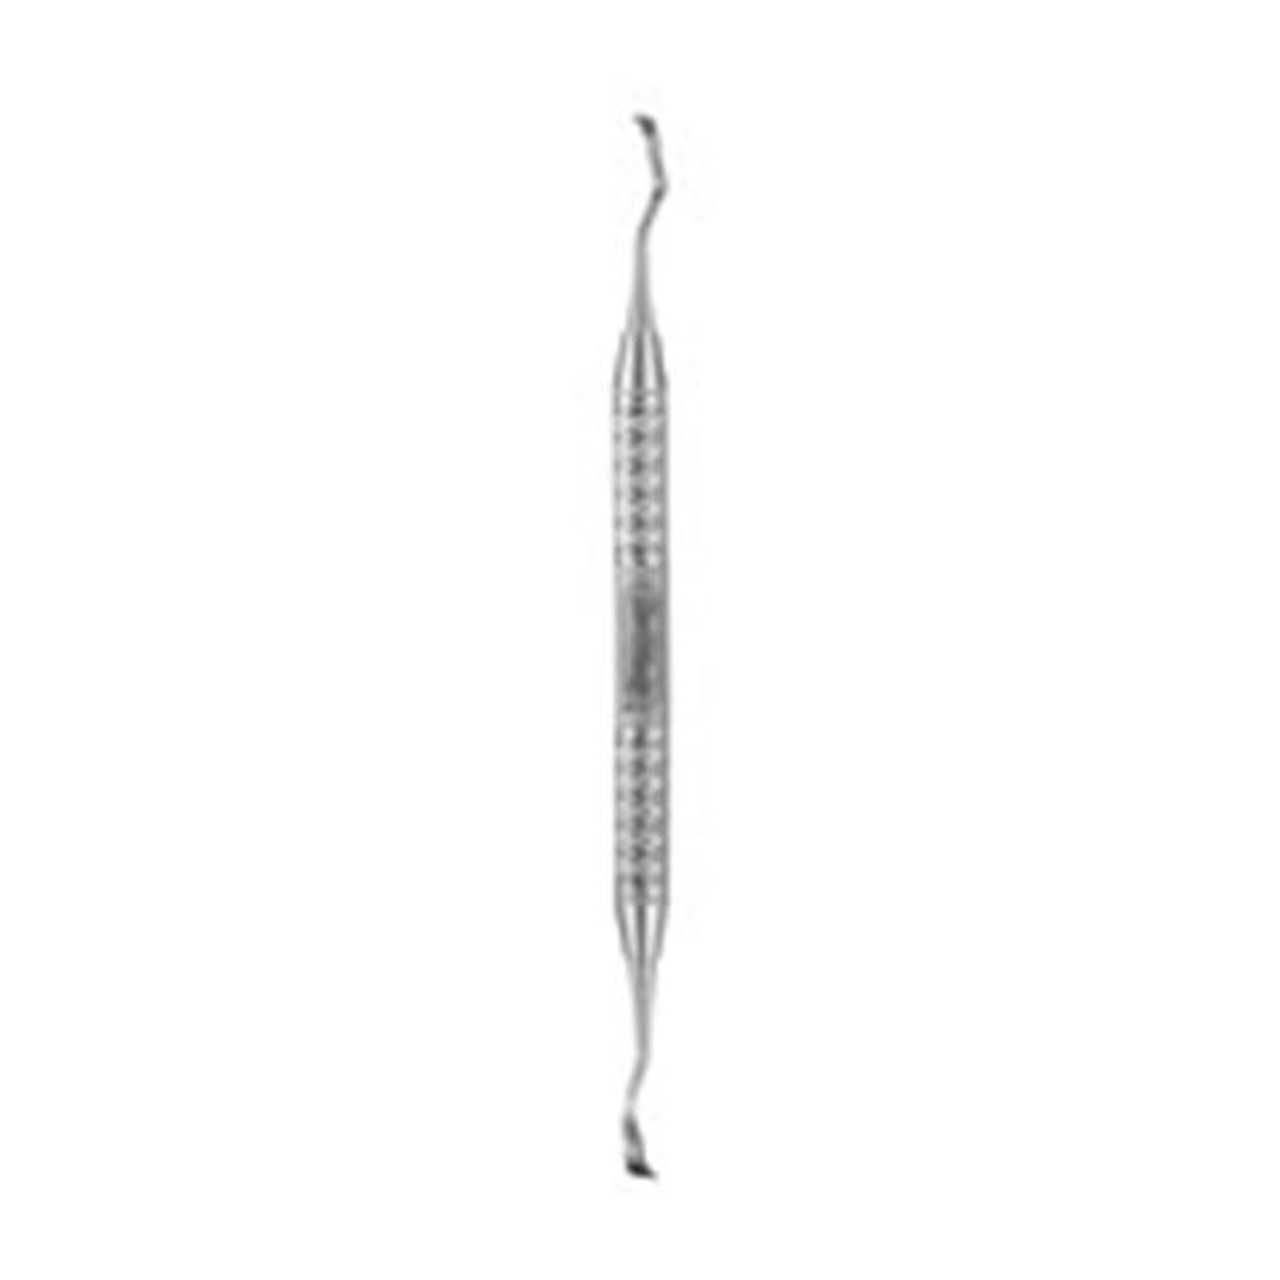 Hu-Friedy - 13K/13KL Double End Surgical Chisel - #9 Everedge Handle